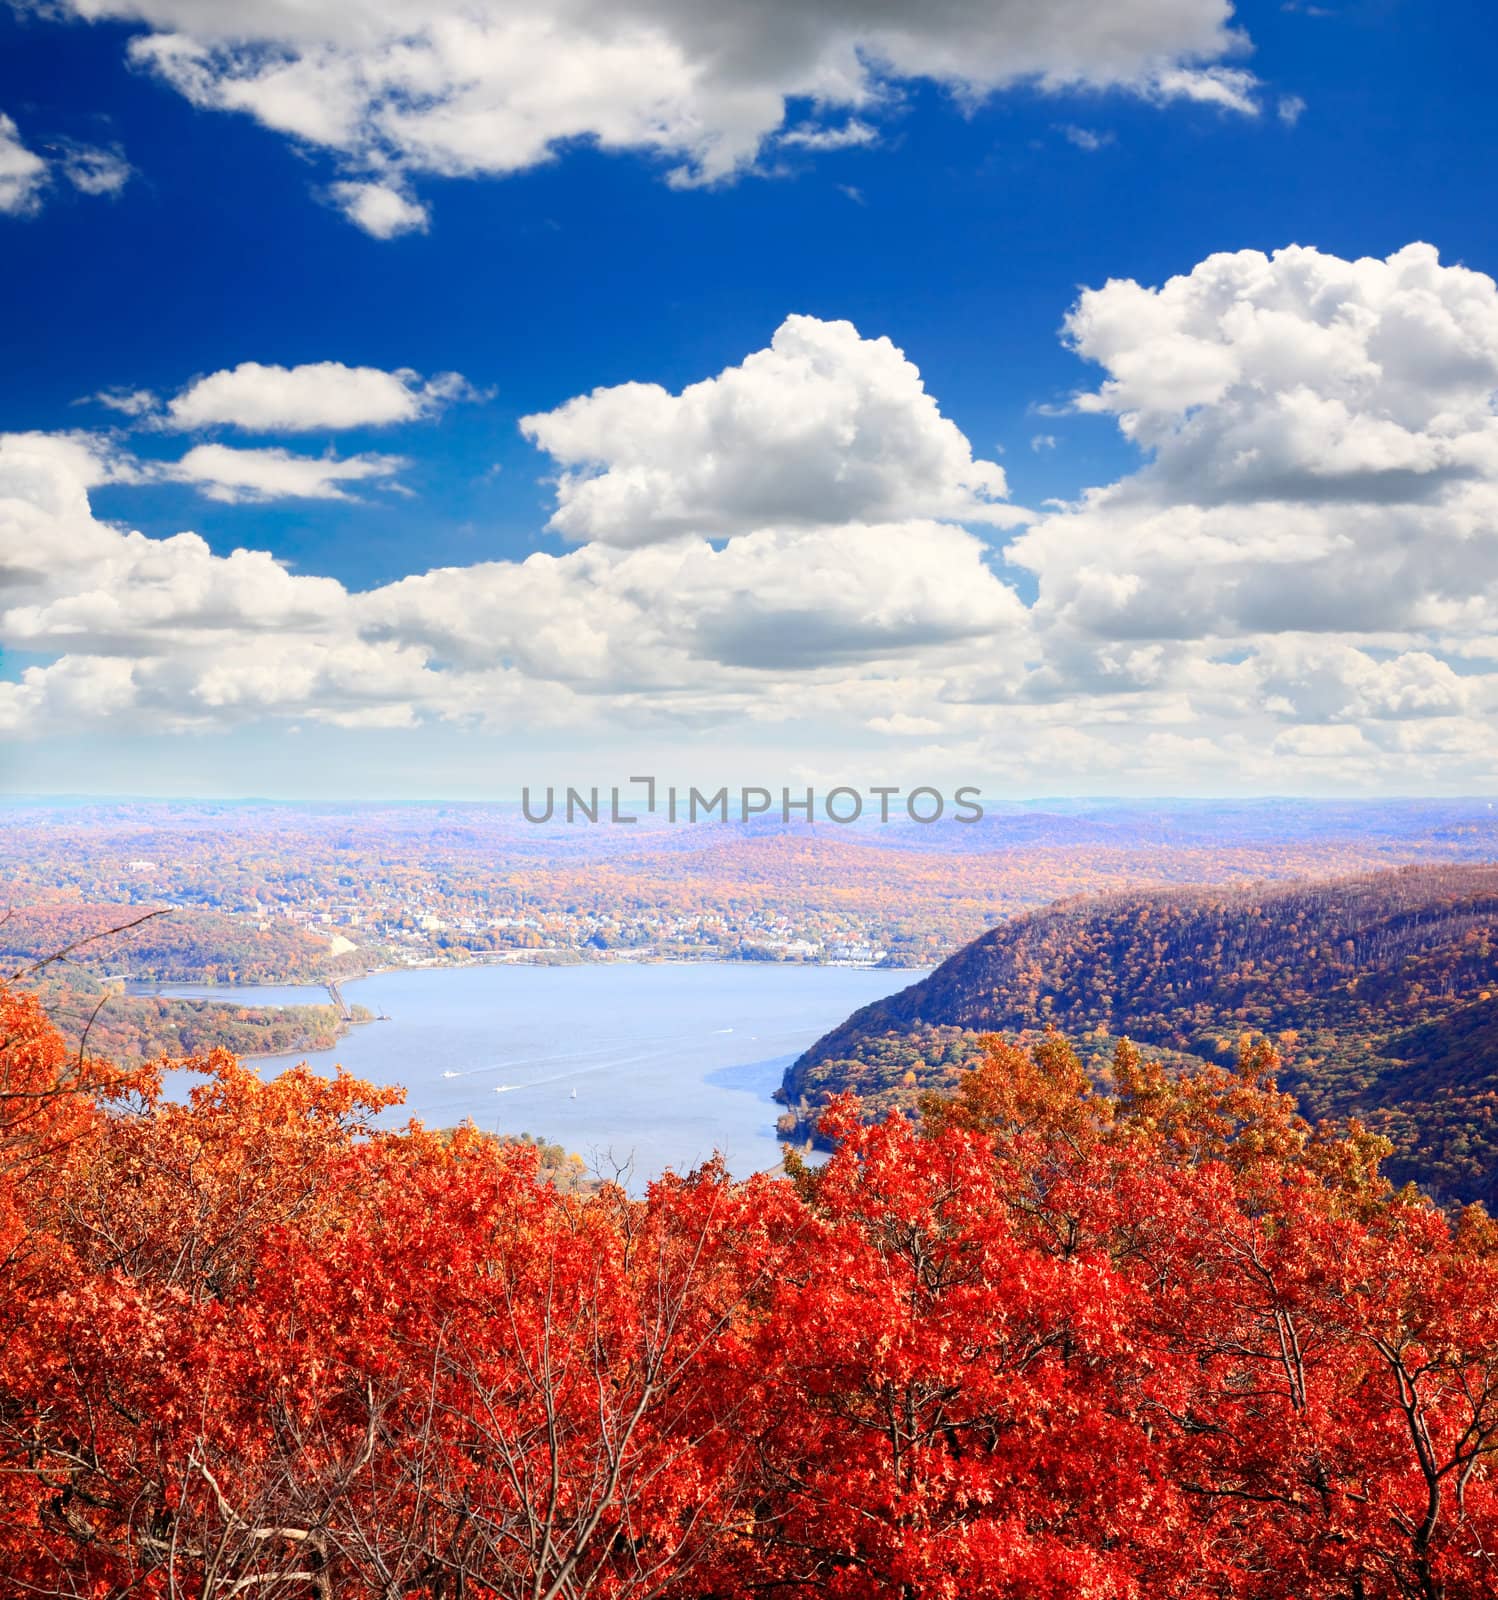 The foliage scenery from the top of Bear Mountain by gary718